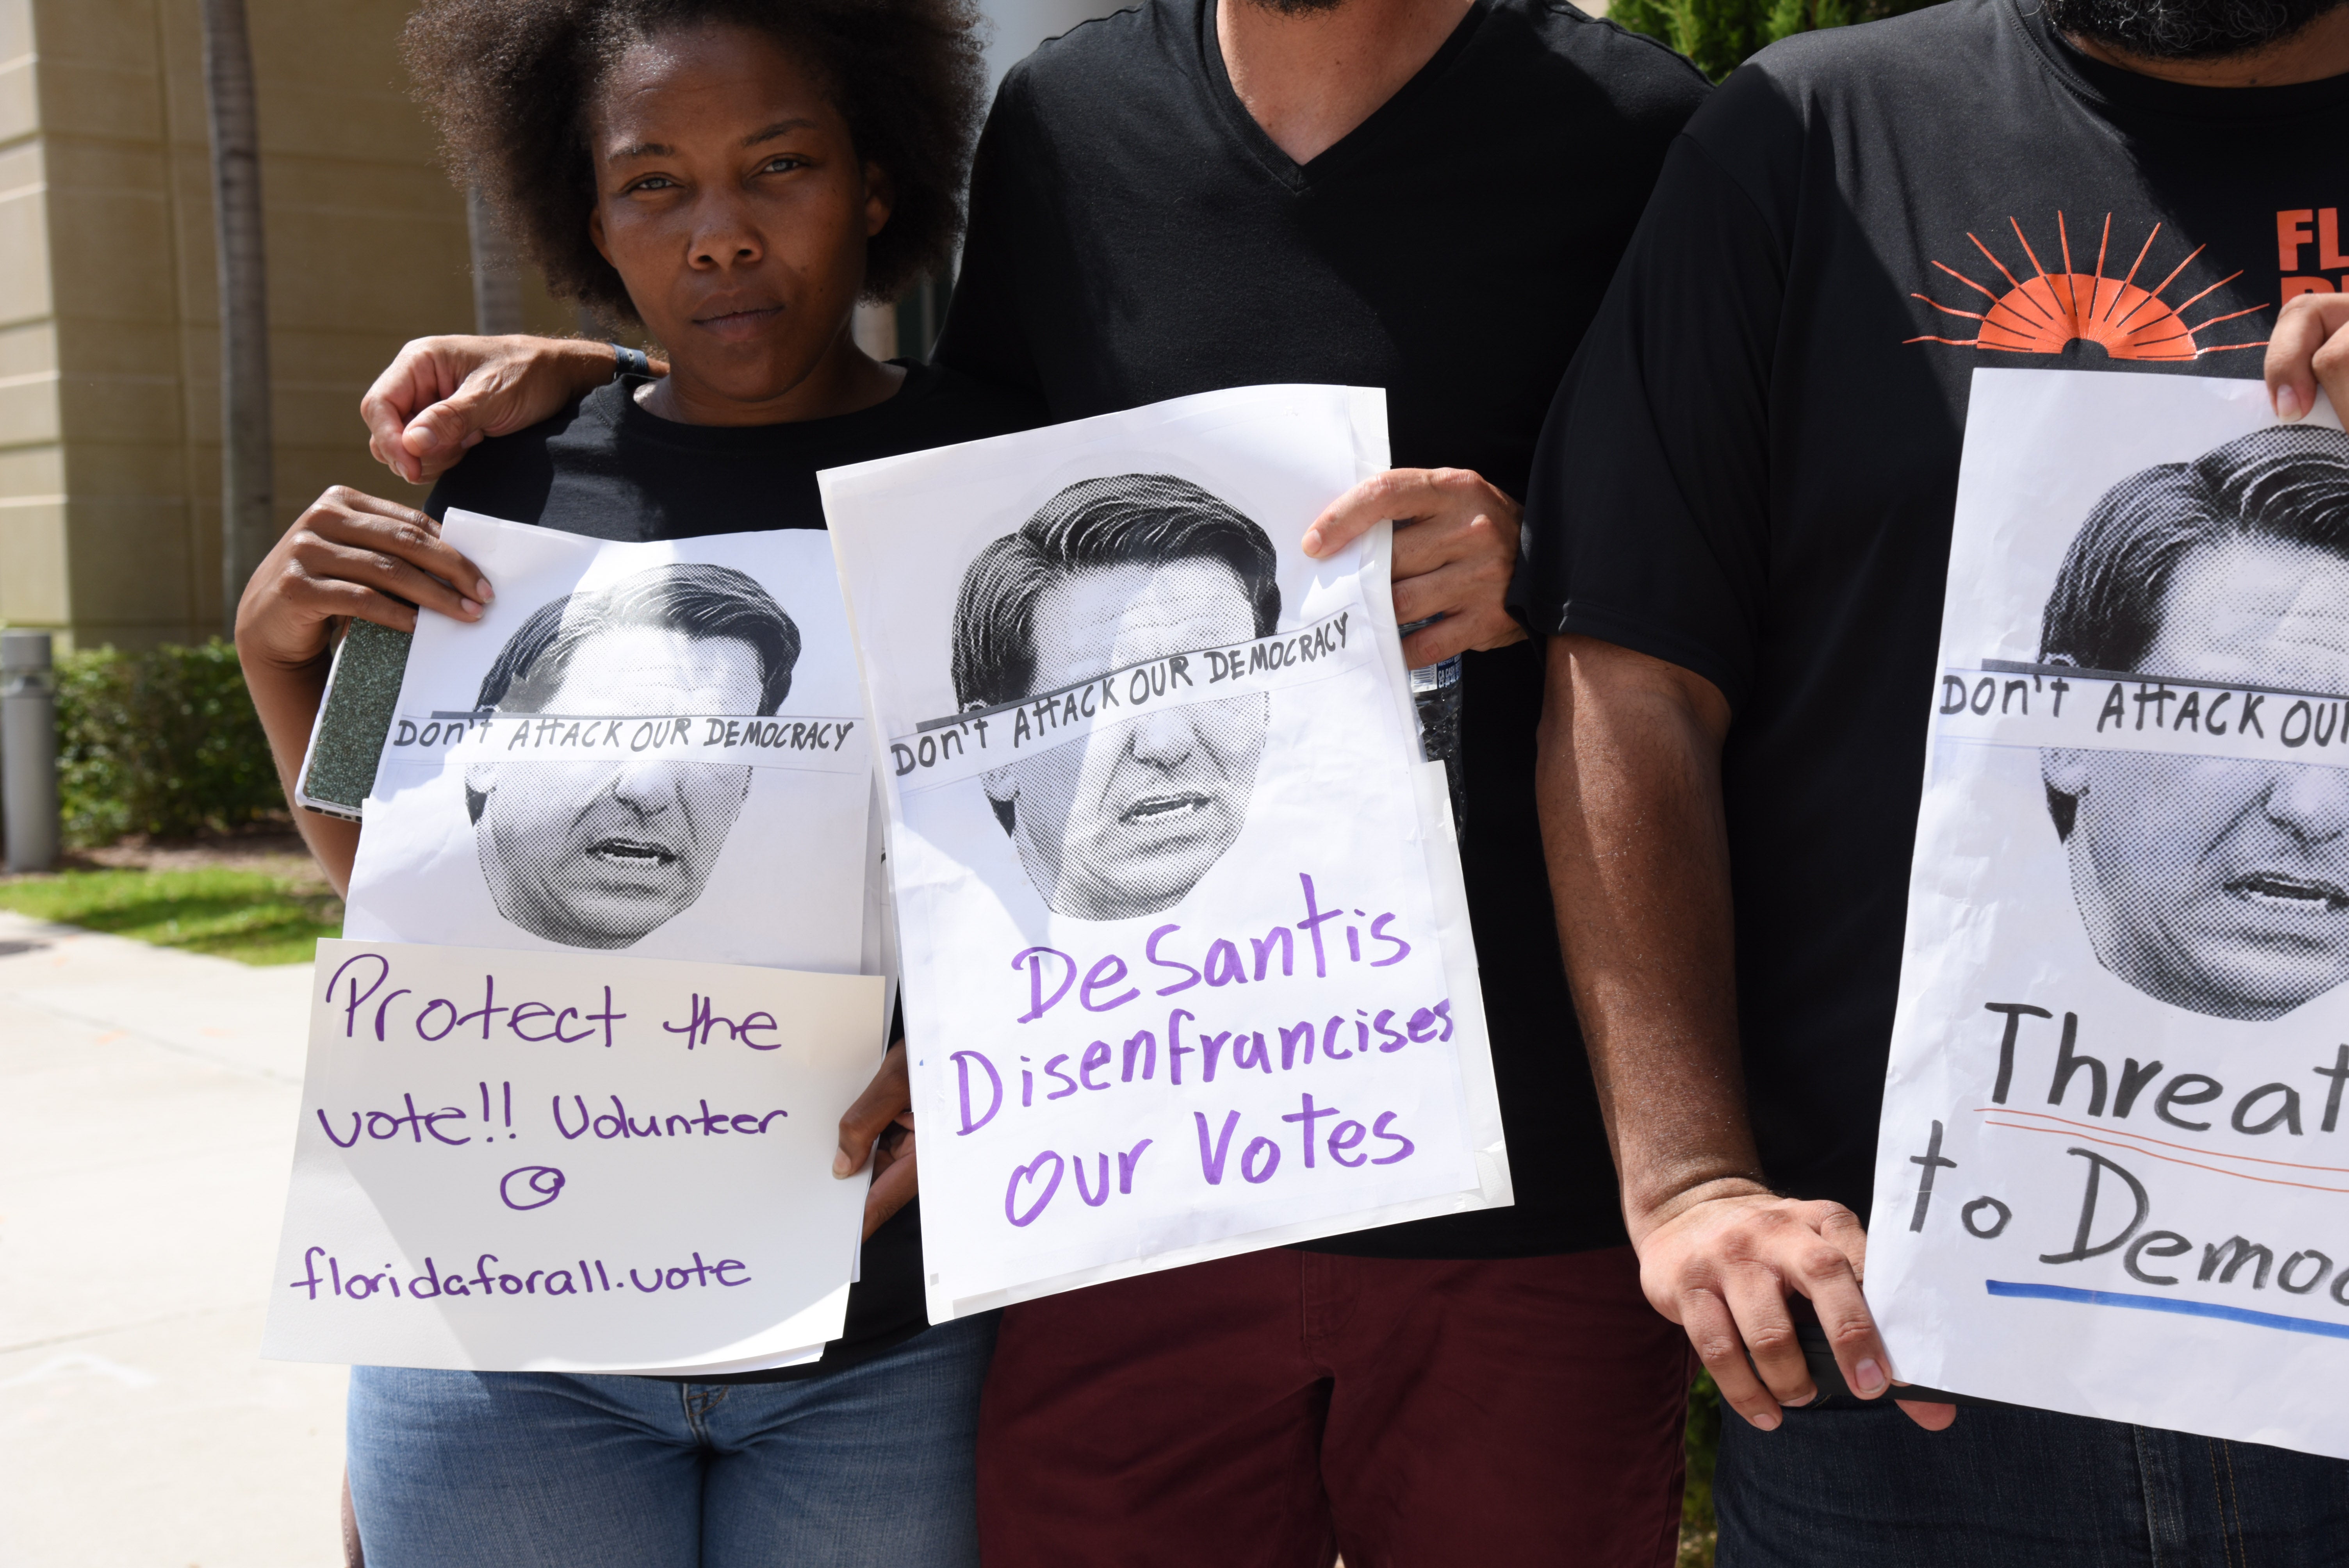 Protestors outside Florida’s Broward County Courthouse on 18 August